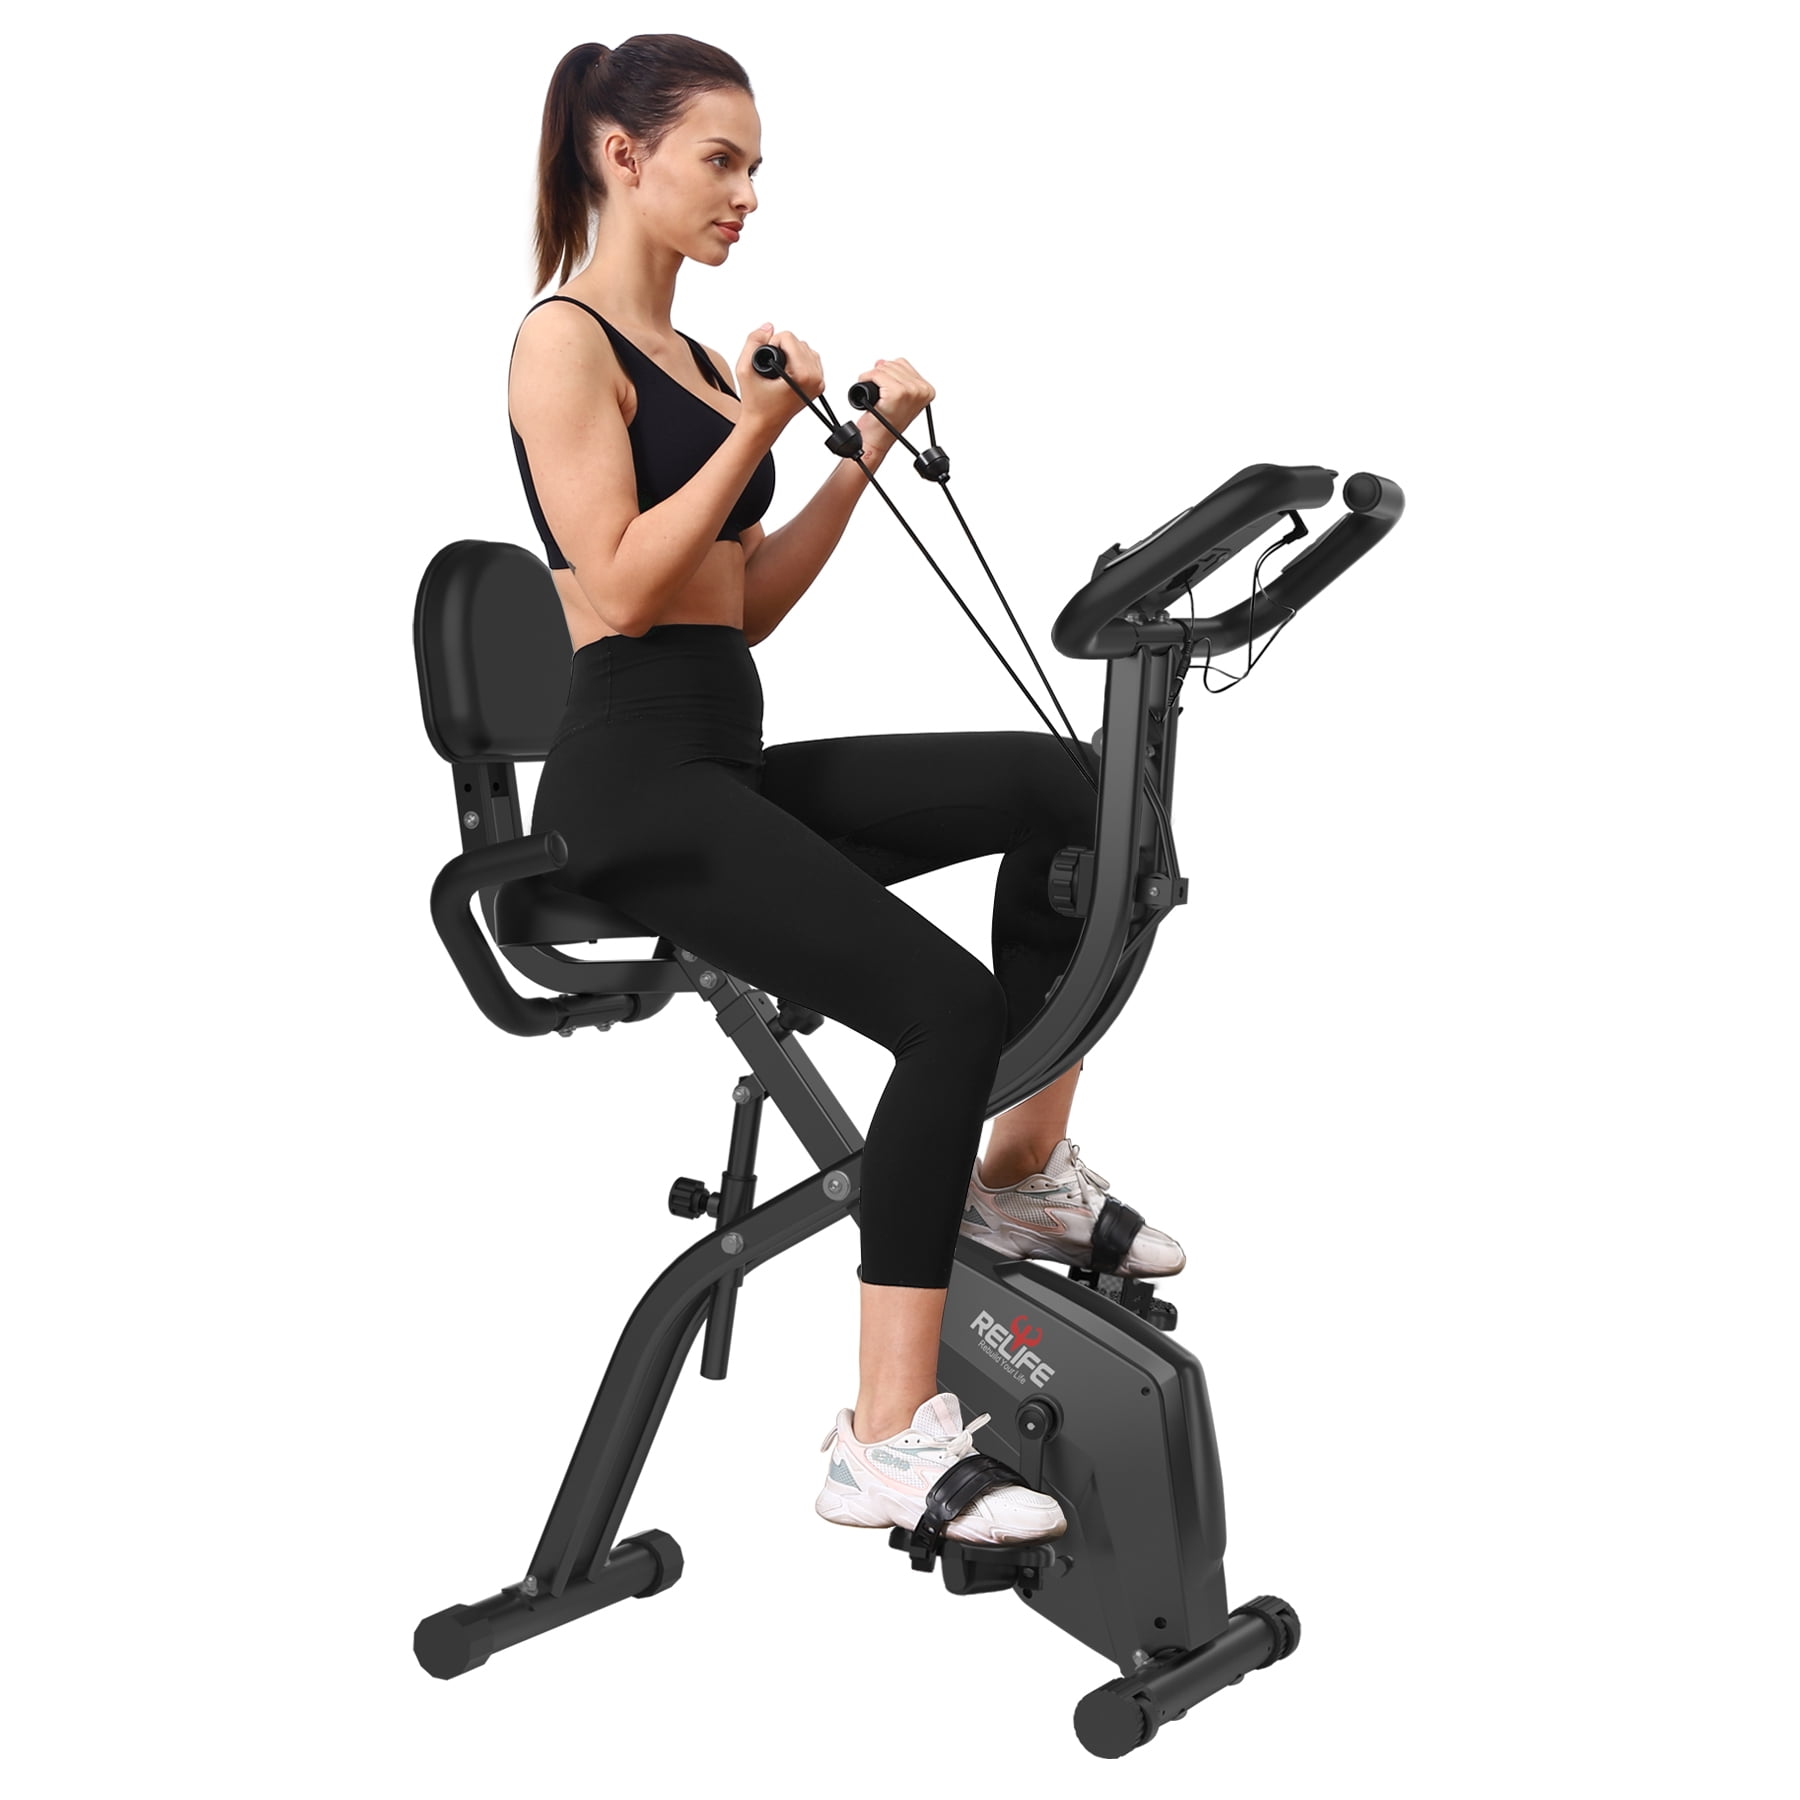 Home Indoor Cycling Exercise Bike Weight Loss Folding Bike Fitness Cardio  Tools Stationary Fitness Equipment Body Building - AliExpress